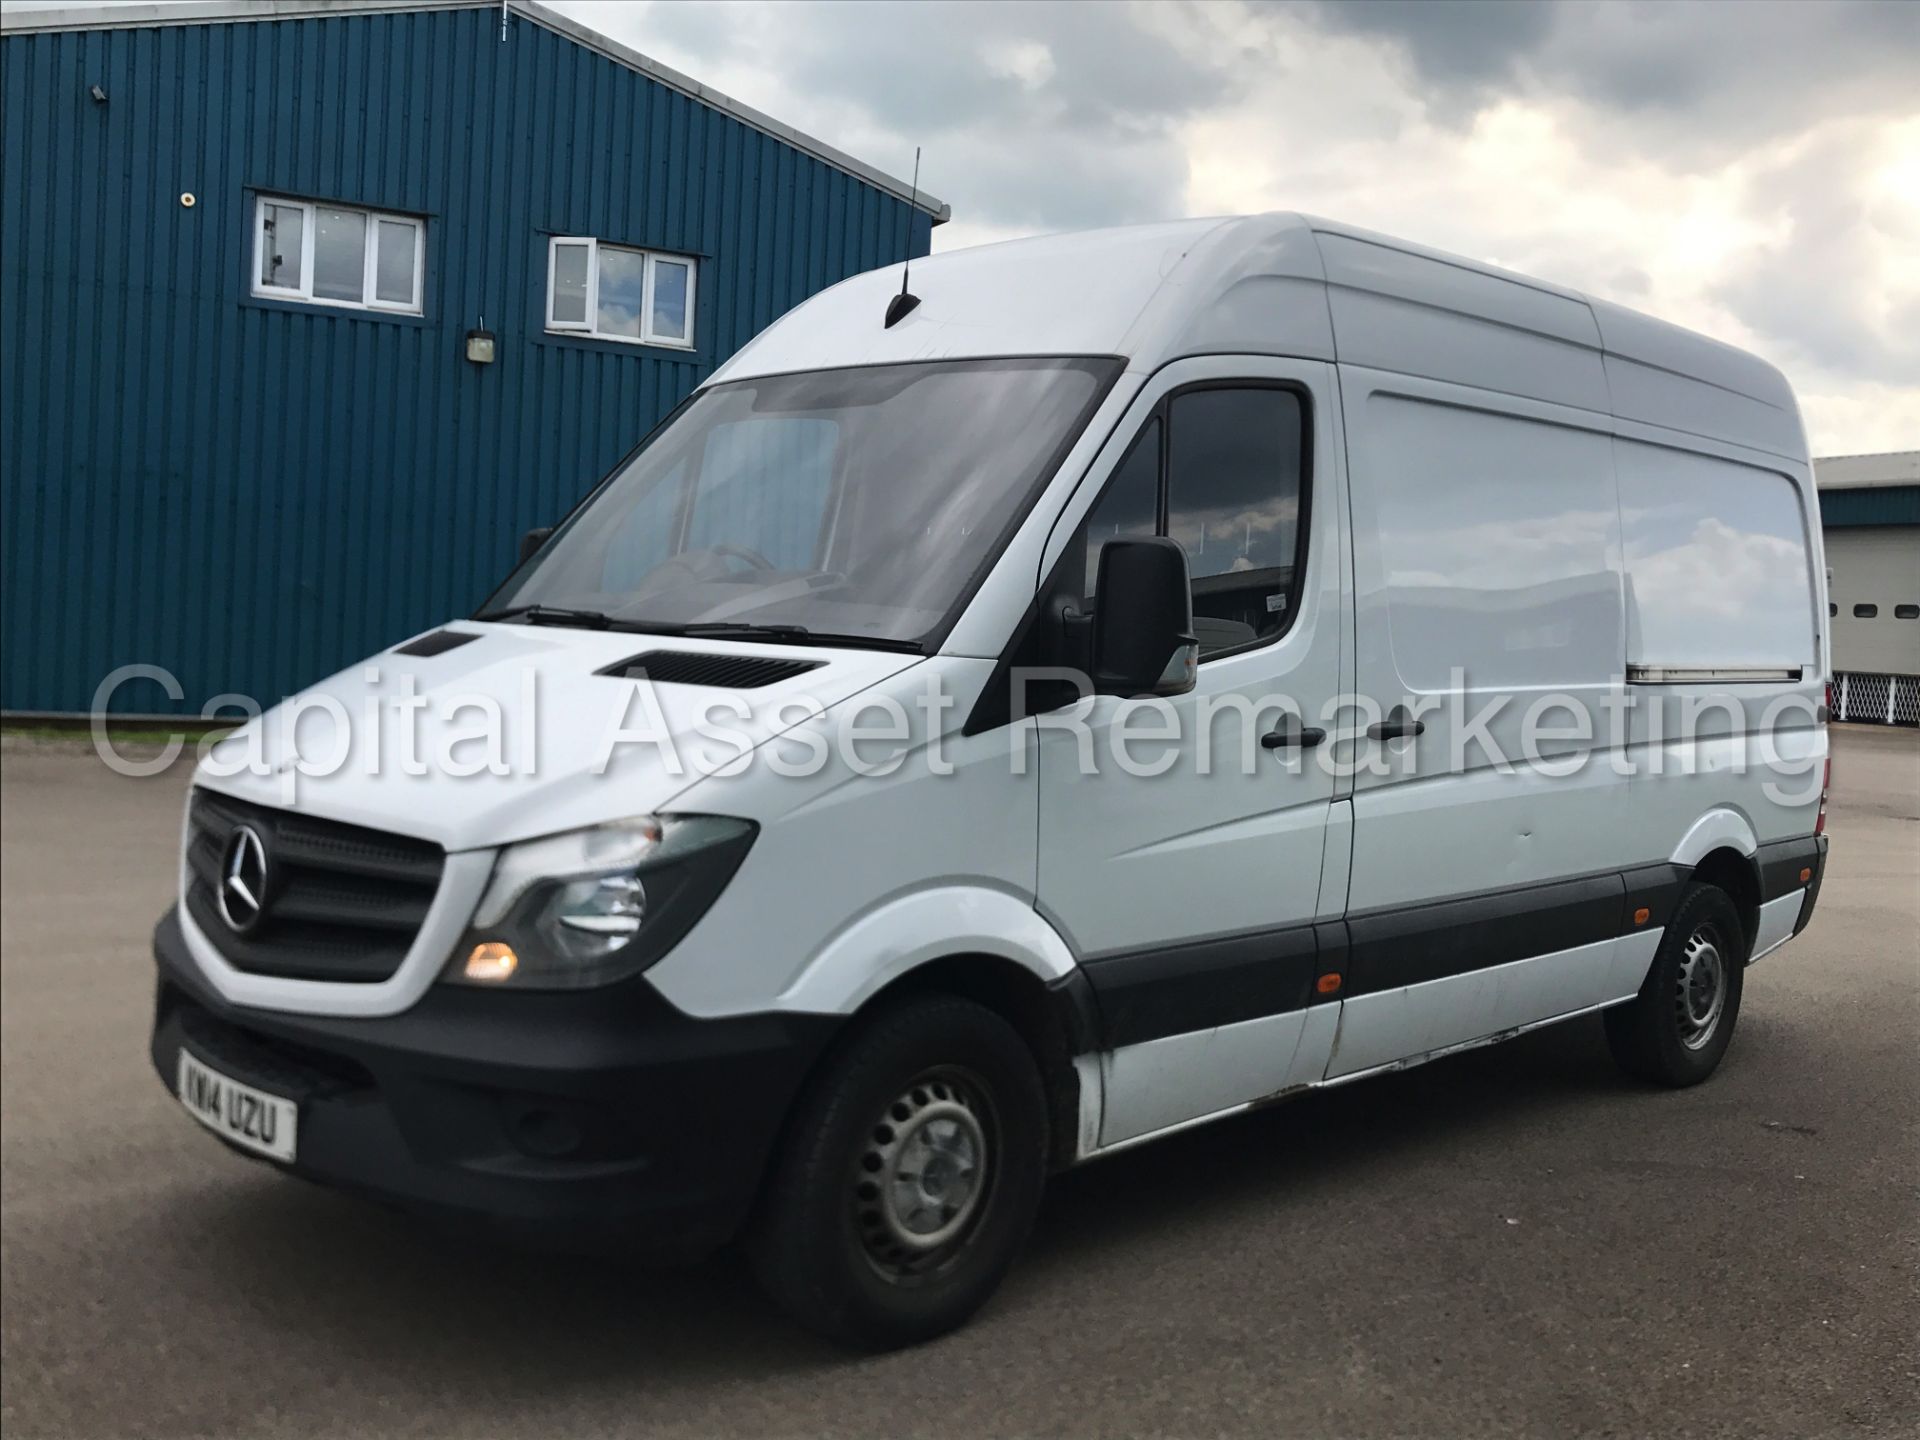 MERCEDES-BENZ SPRINTER 313 CDI 'MWB HI-ROOF' (2014) '130 BHP - 6 SPEED' (1 COMPANY OWNER FROM NEW) - Image 5 of 22